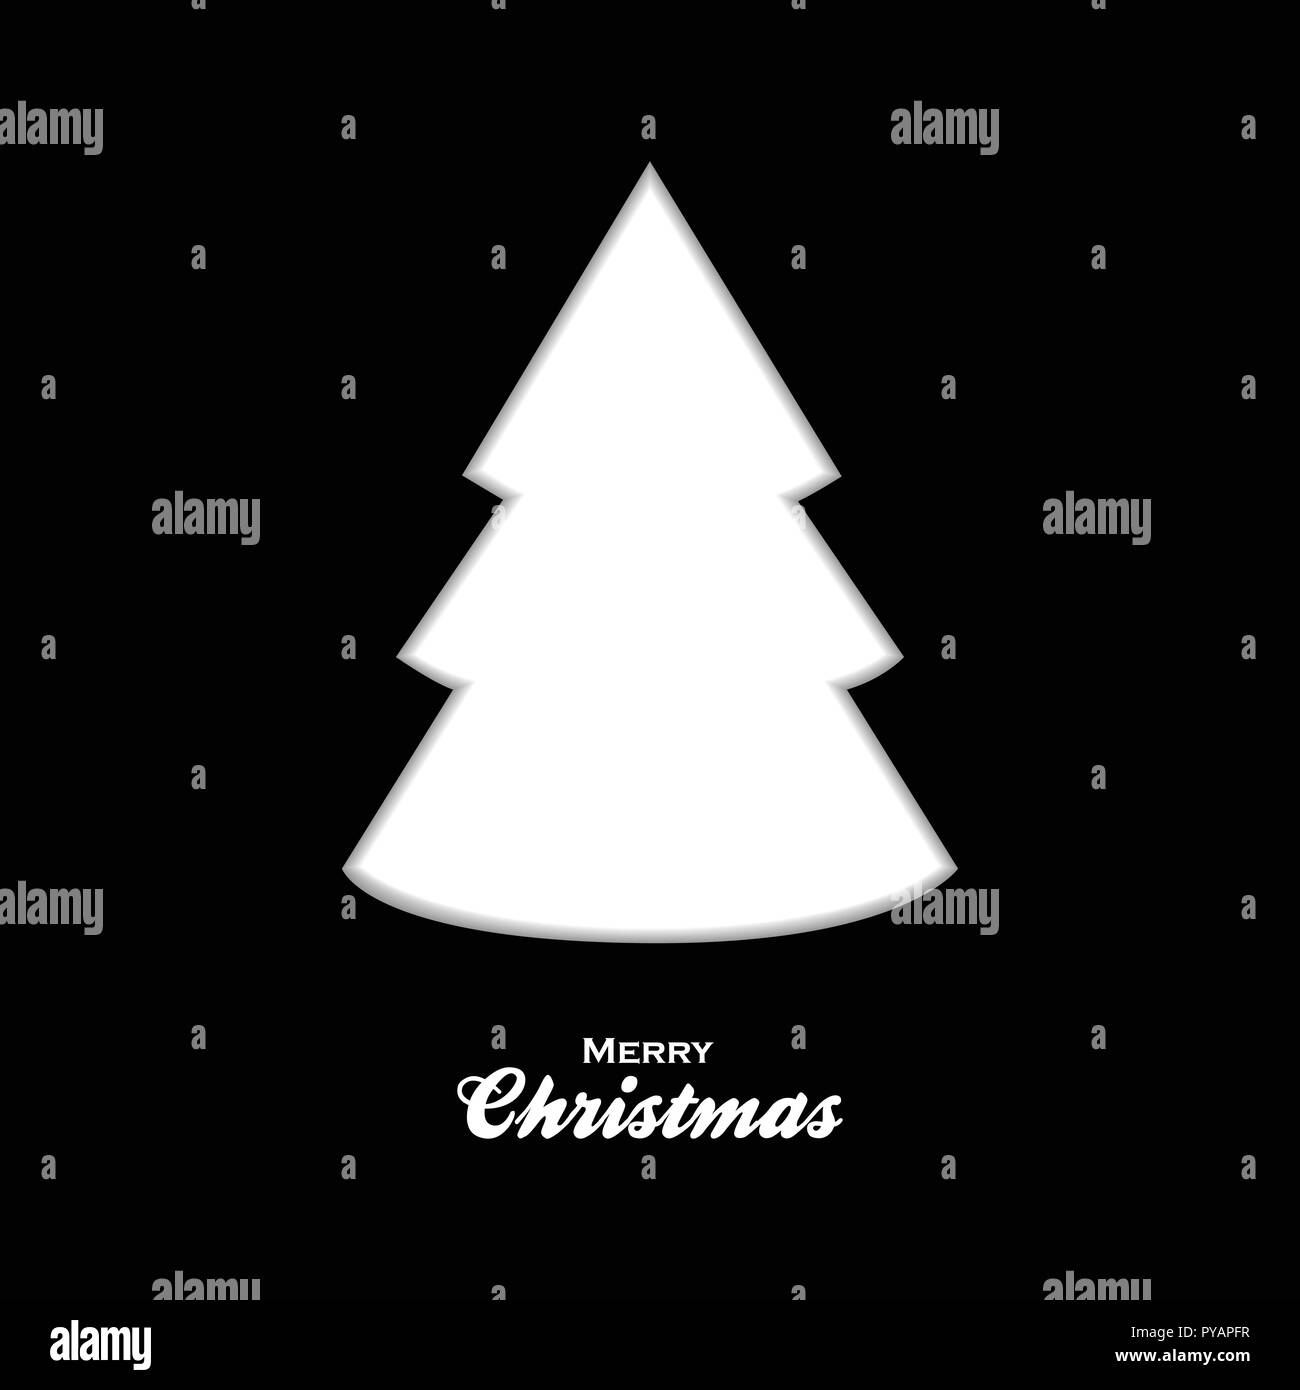 Black and white christmas Stock Vector Images - Alamy